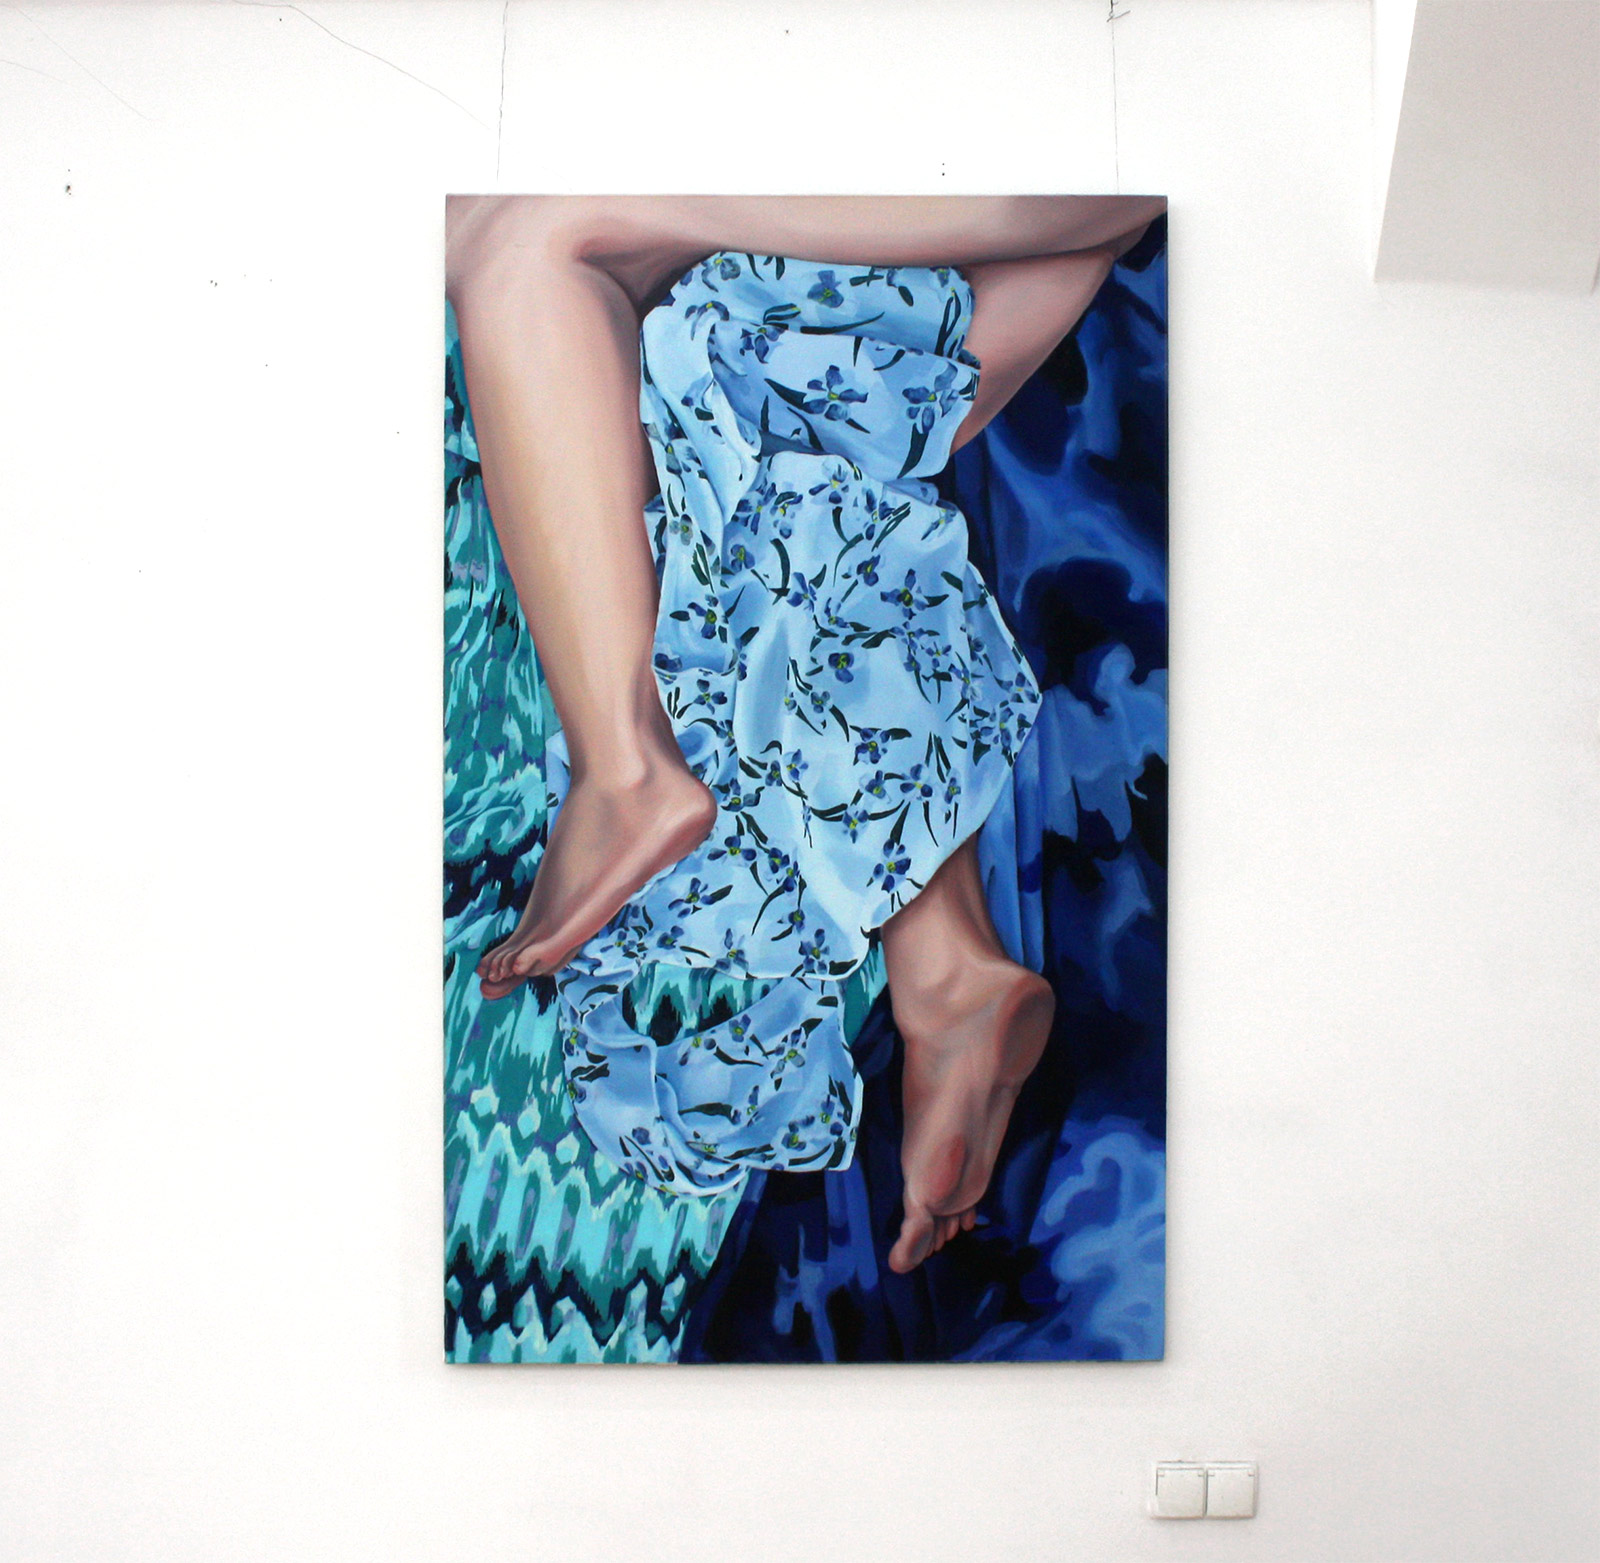 paintings, aesthetic, colorful, figurative, portraiture, bodies, patterns, people, sexuality, blue, turquoise, flax-canvas, oil, beautiful, danish, decorative, design, female, feminist, flowers, interior, interior-design, modern, modern-art, naturalism, nordic, photorealistic, pretty, scandinavien, women, Buy original high quality art. Paintings, drawings, limited edition prints & posters by talented artists.